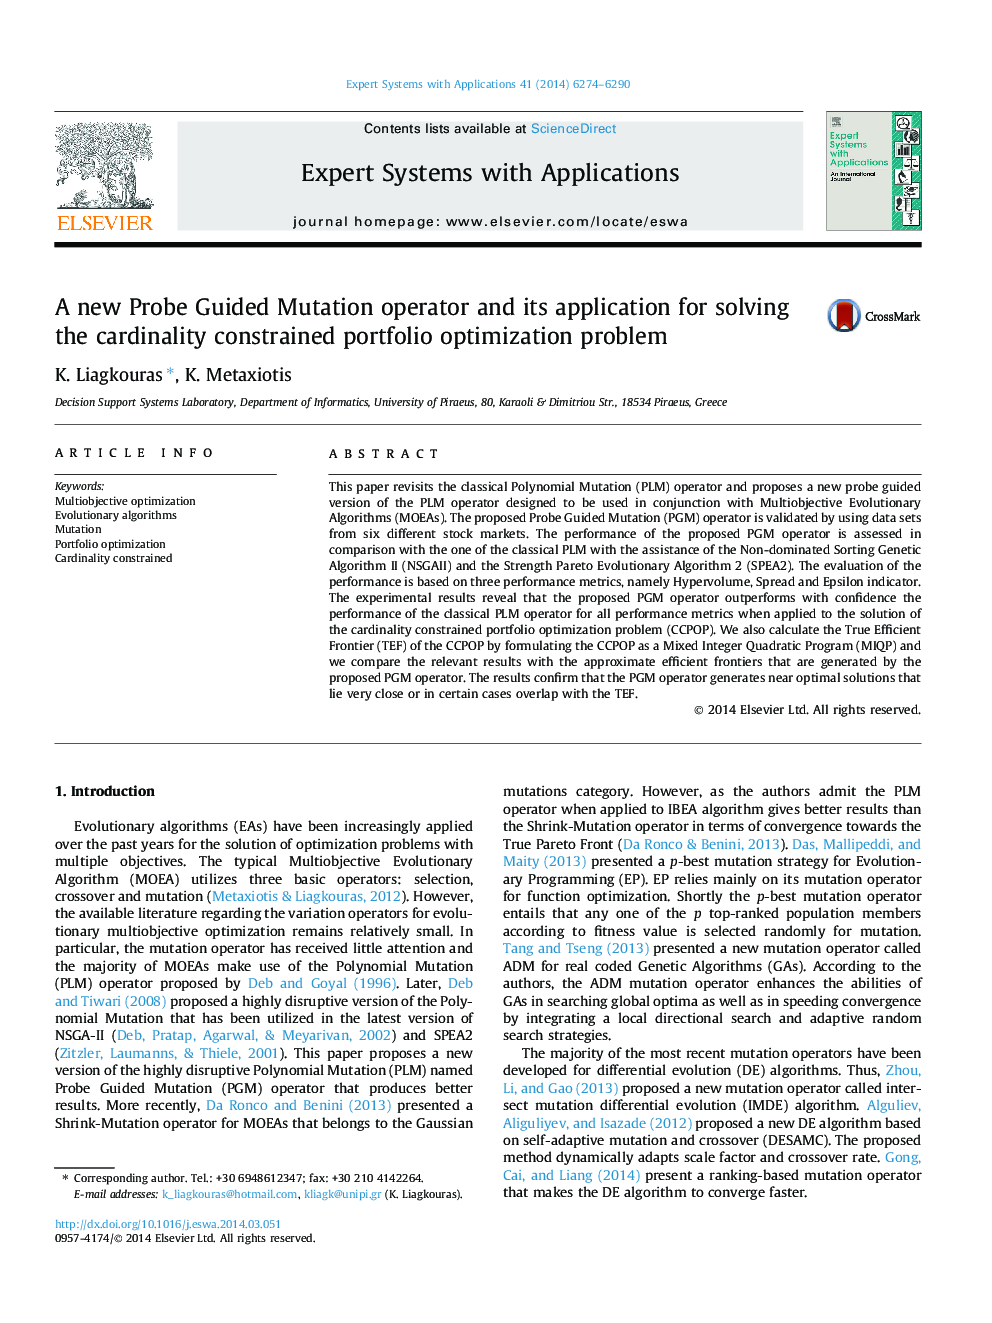 A new Probe Guided Mutation operator and its application for solving the cardinality constrained portfolio optimization problem